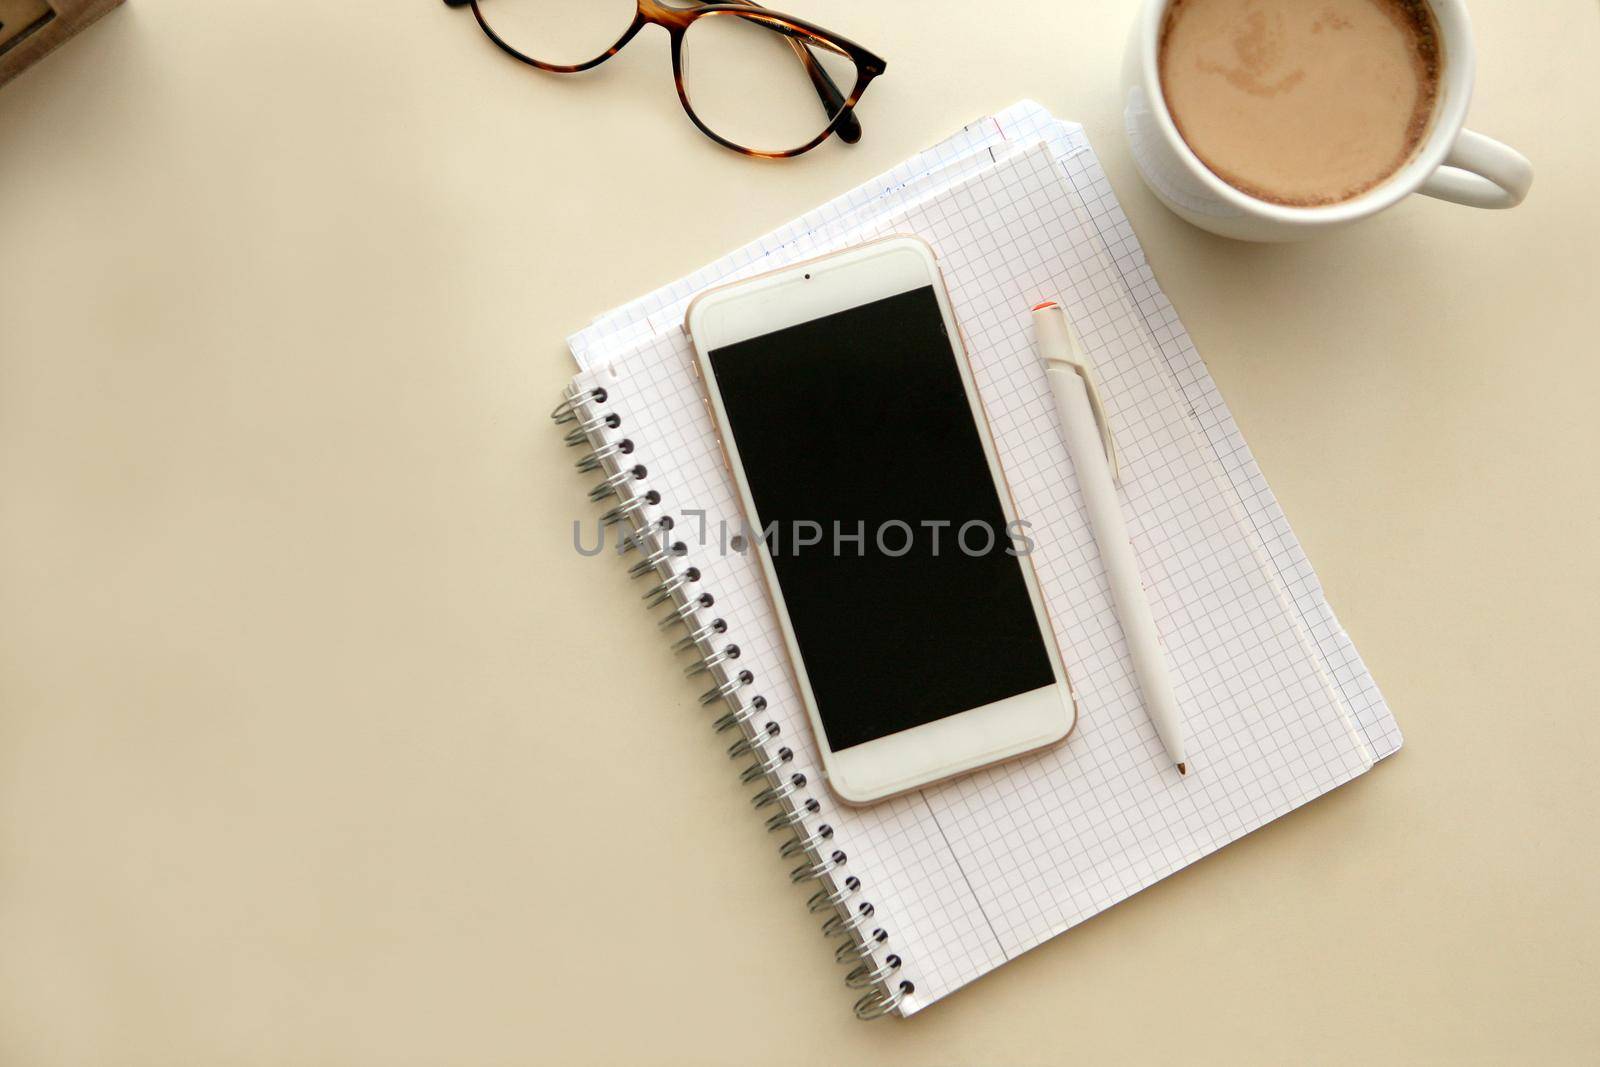 Mobile phone and notes paper. Retro style interior - cozy working place at home stylish interior in warm pastel colors, table and white coffee mug with glasses. stay at home - a place for home office or a place to relax.